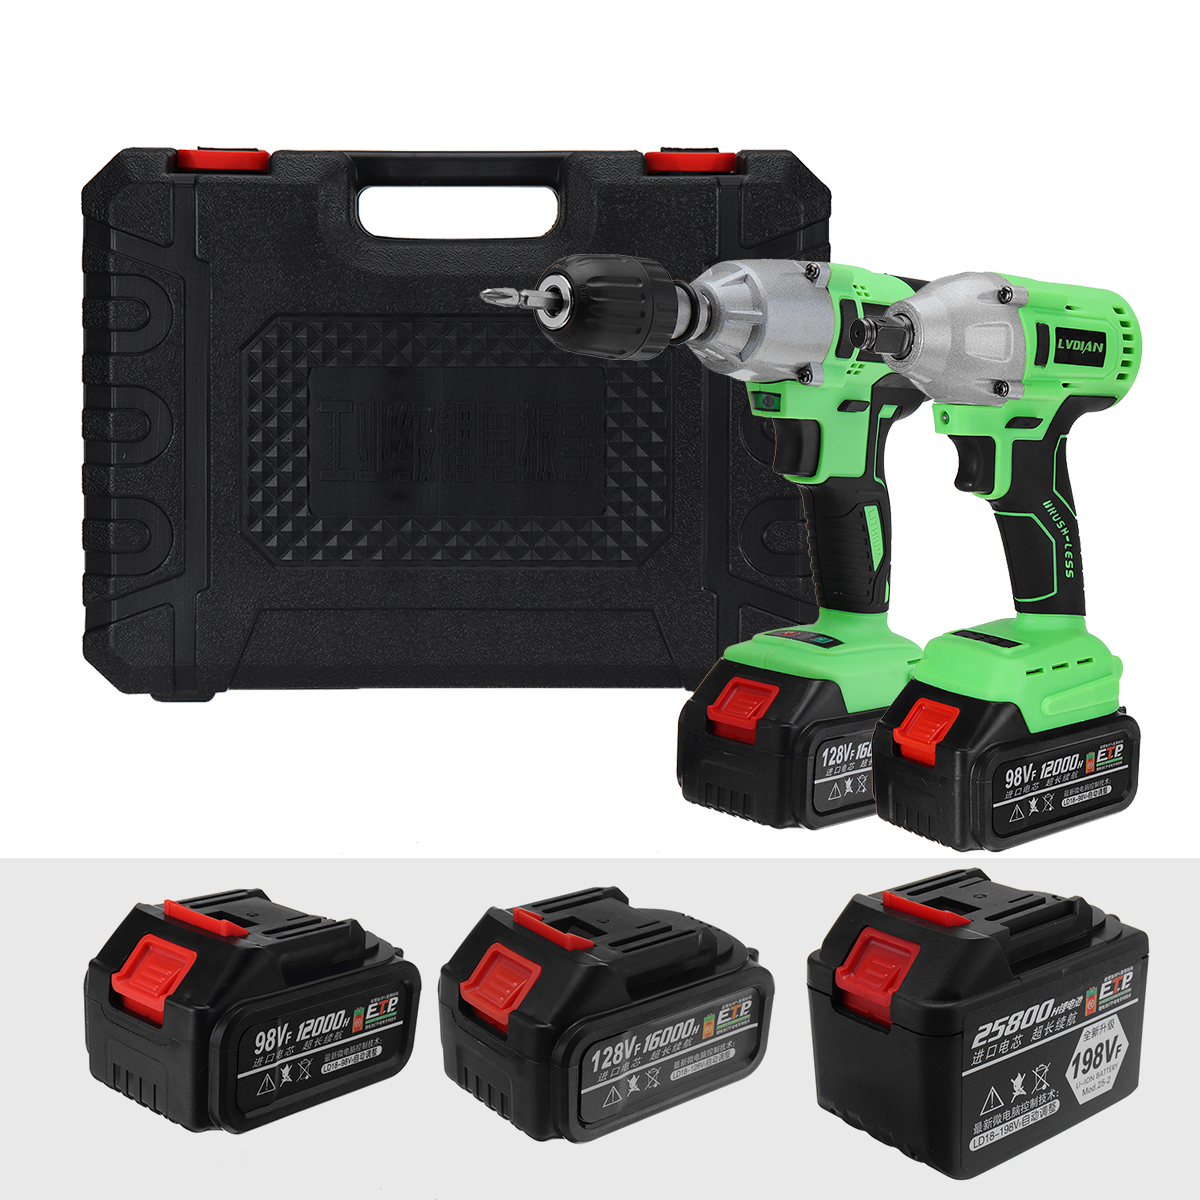 98128188VF-Brushless-Cordless-Impact-Wrench-Drill-LED-Light-Li-Ion-Battery-Electric-Impact-Wrench-1404354-4